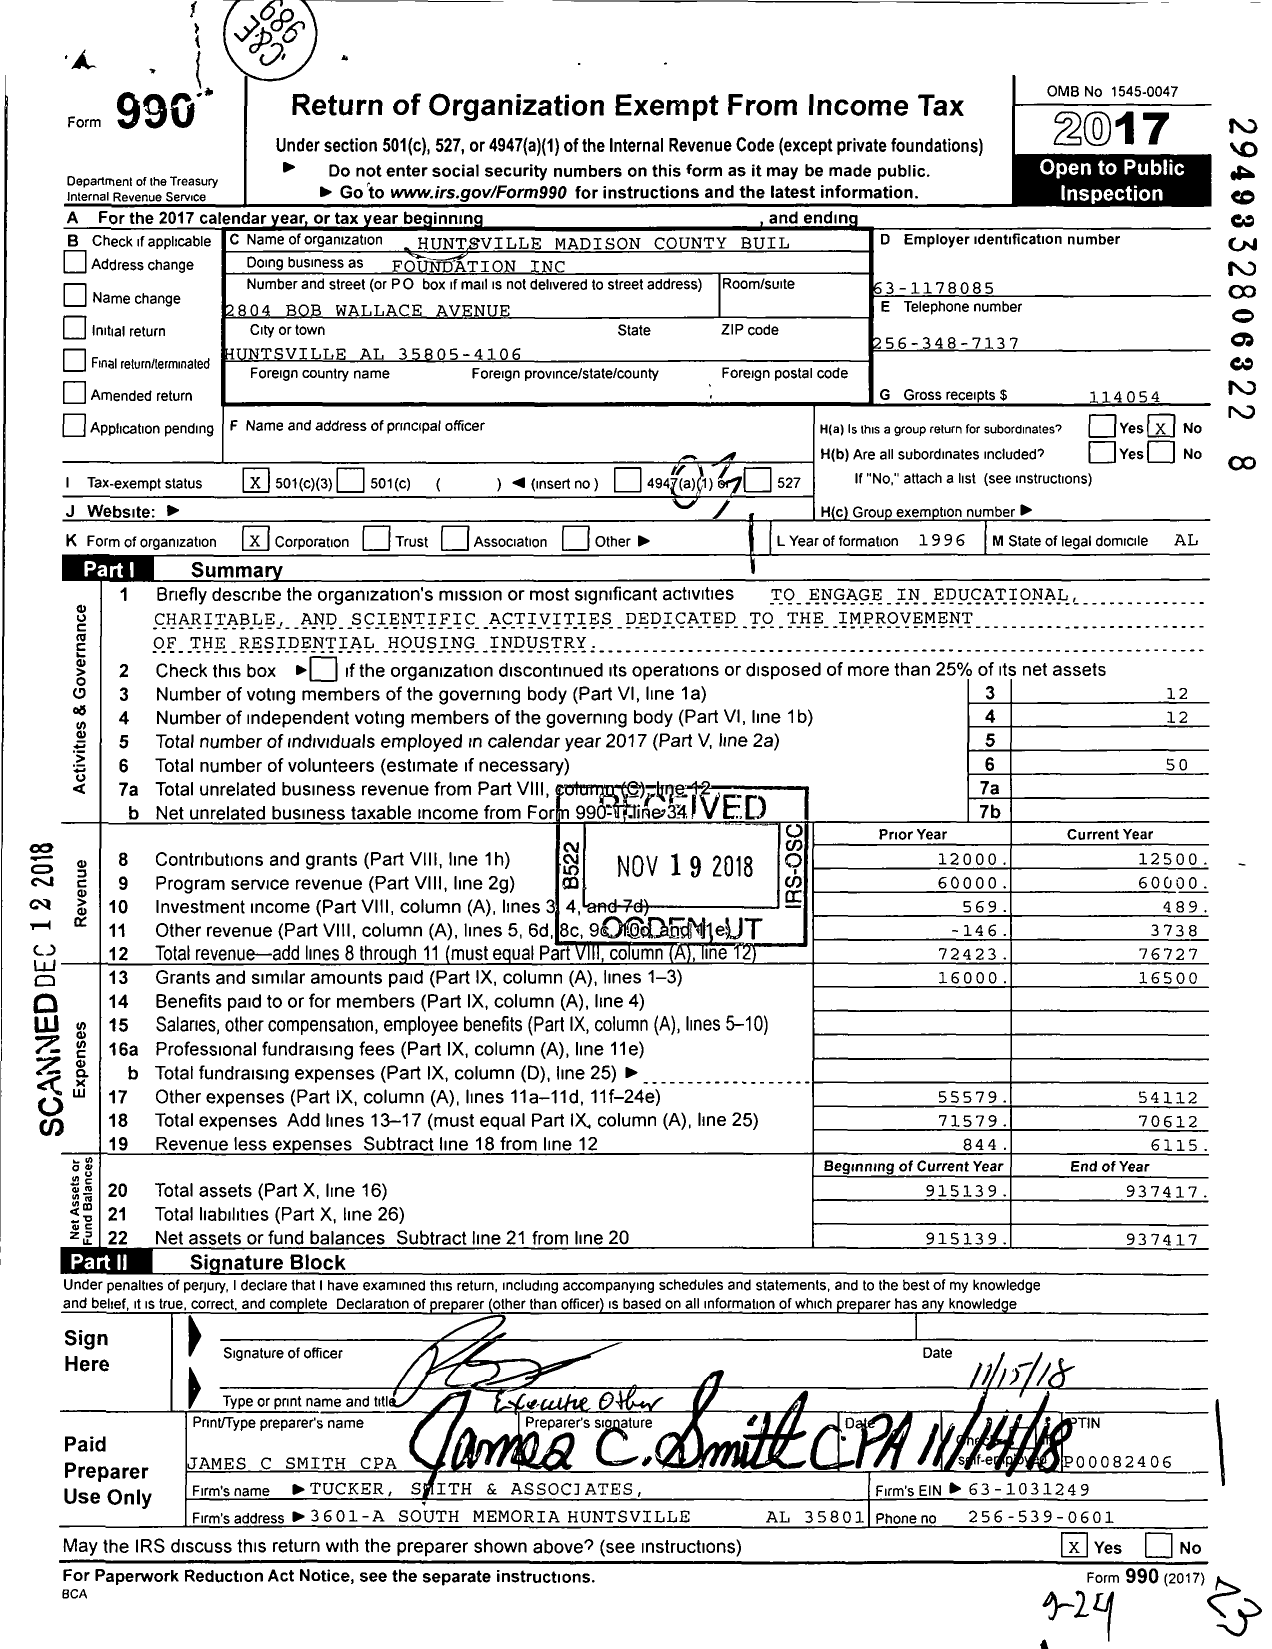 Image of first page of 2017 Form 990 for Huntsville Madison County Buil Foundation